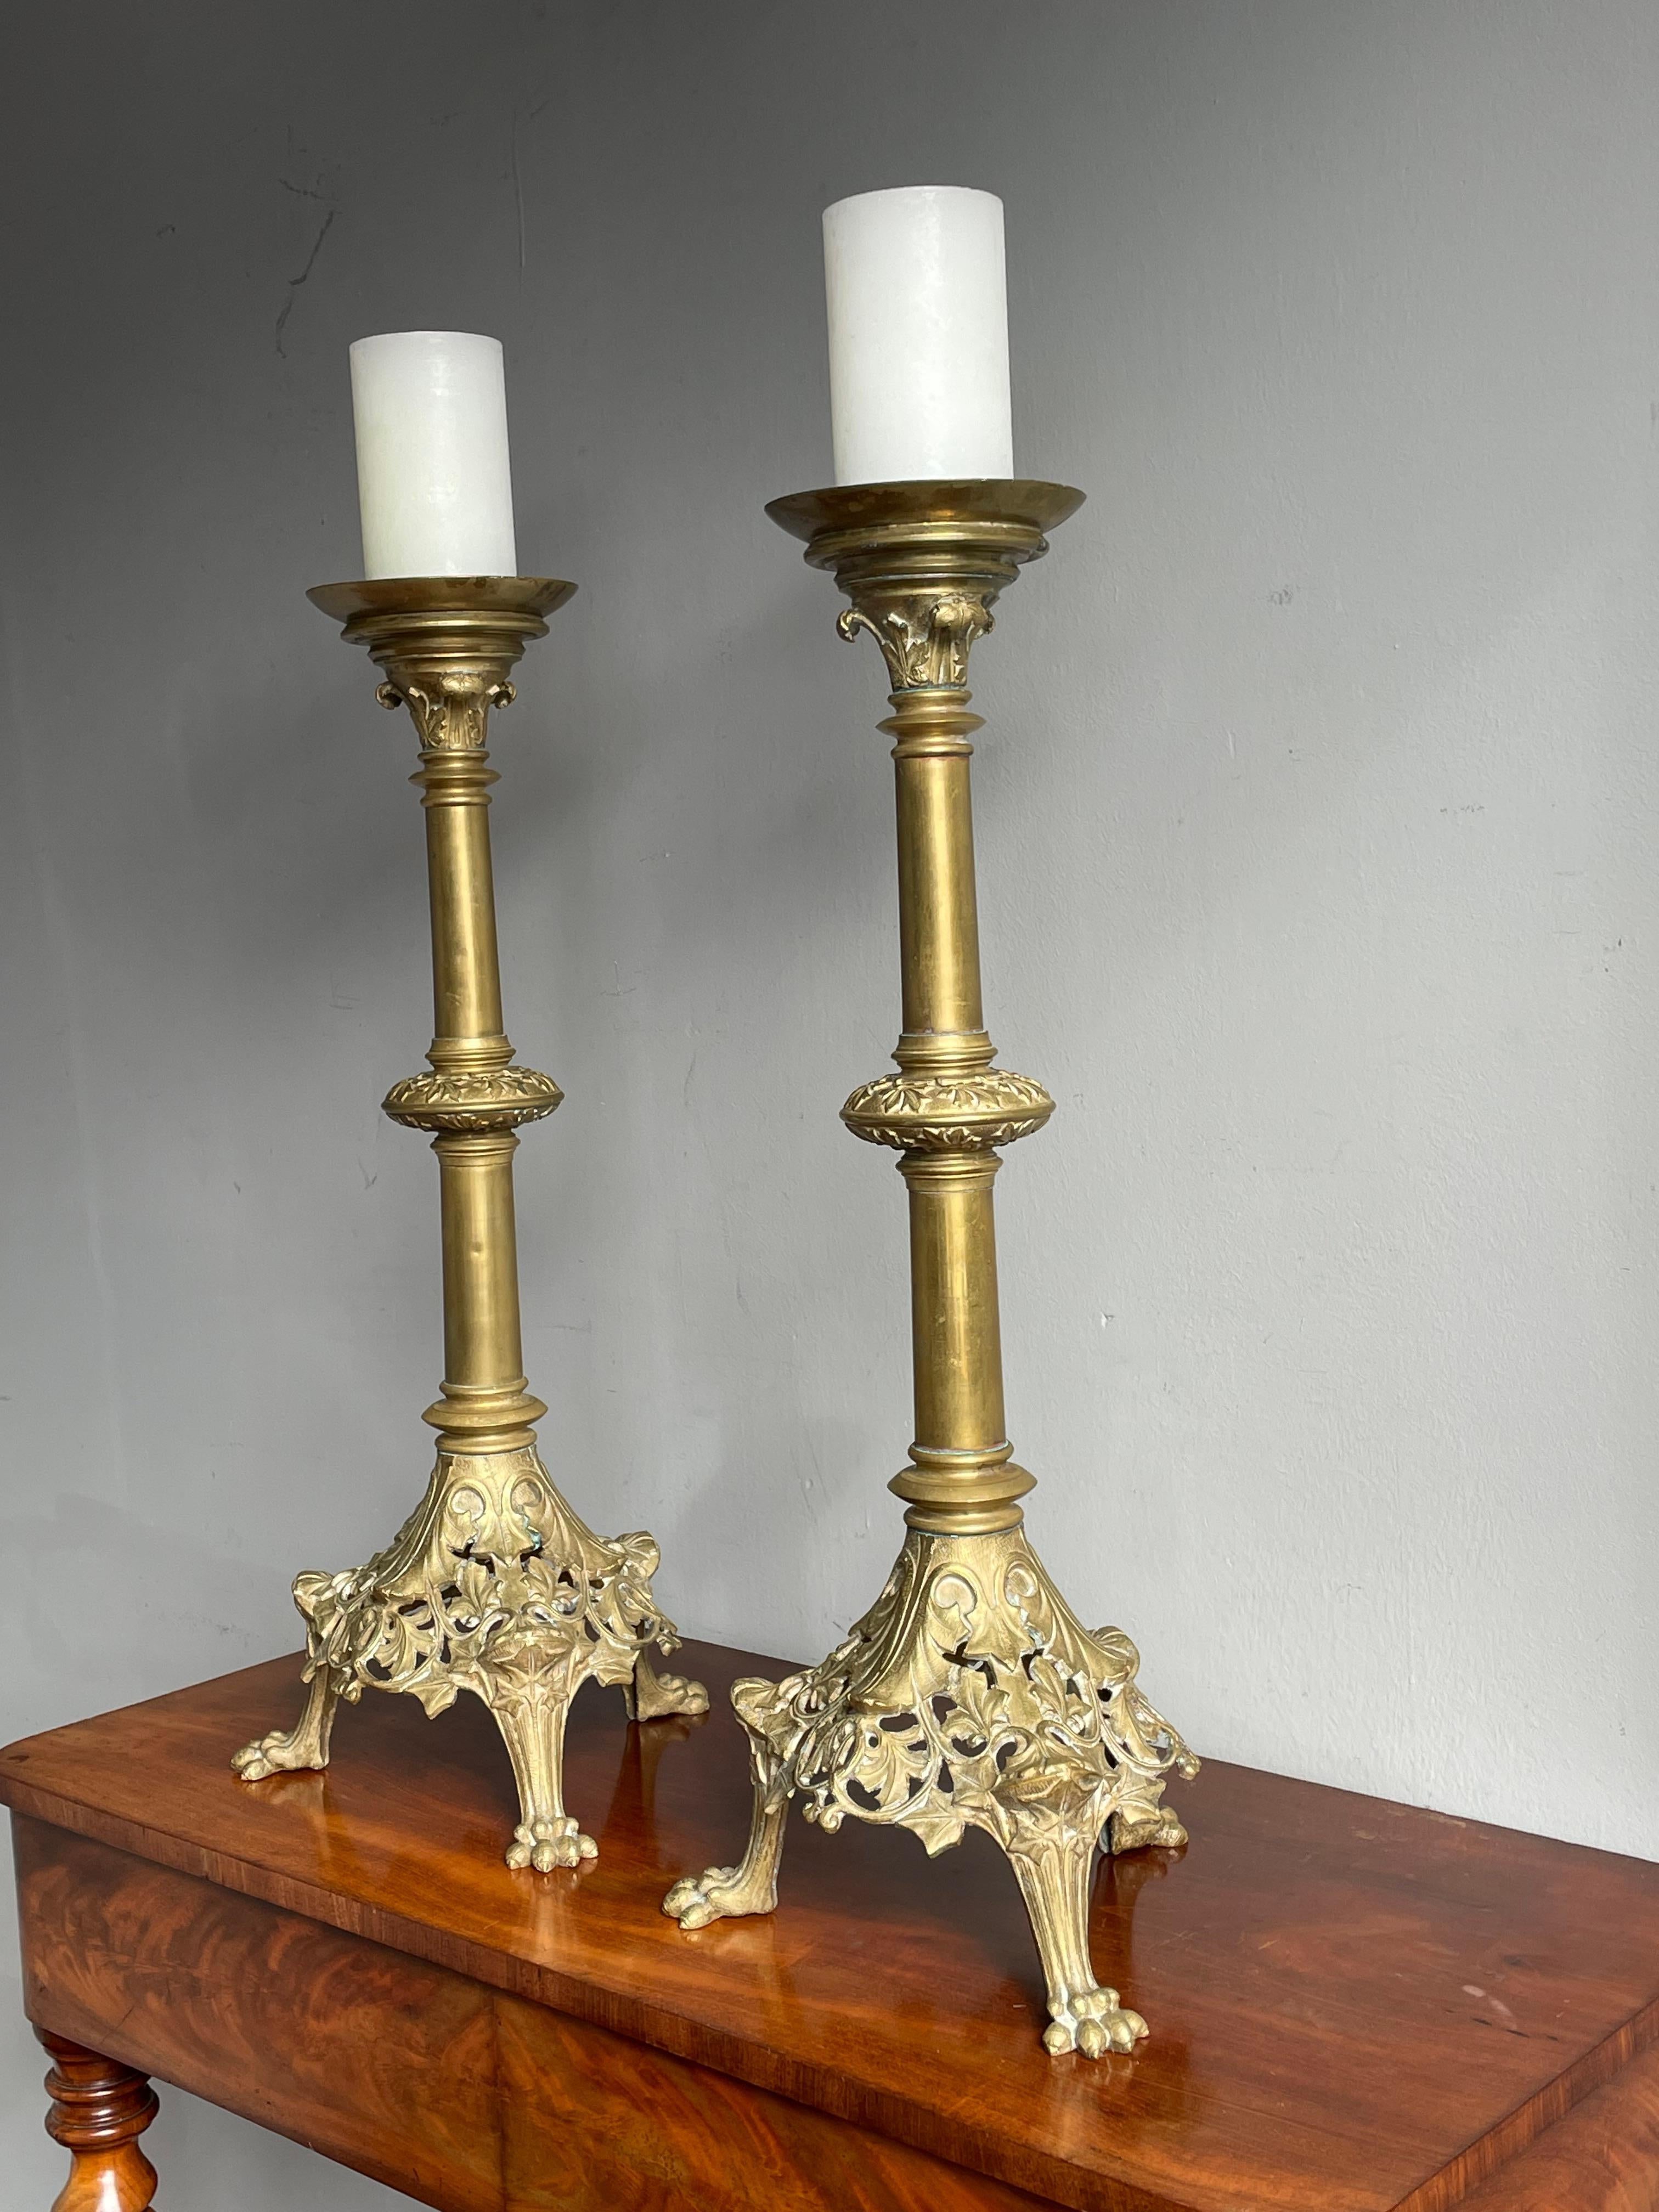 Metal Antique Pair of Bronze Gothic Revival Church Altar Candlesticks / Candle Holders For Sale